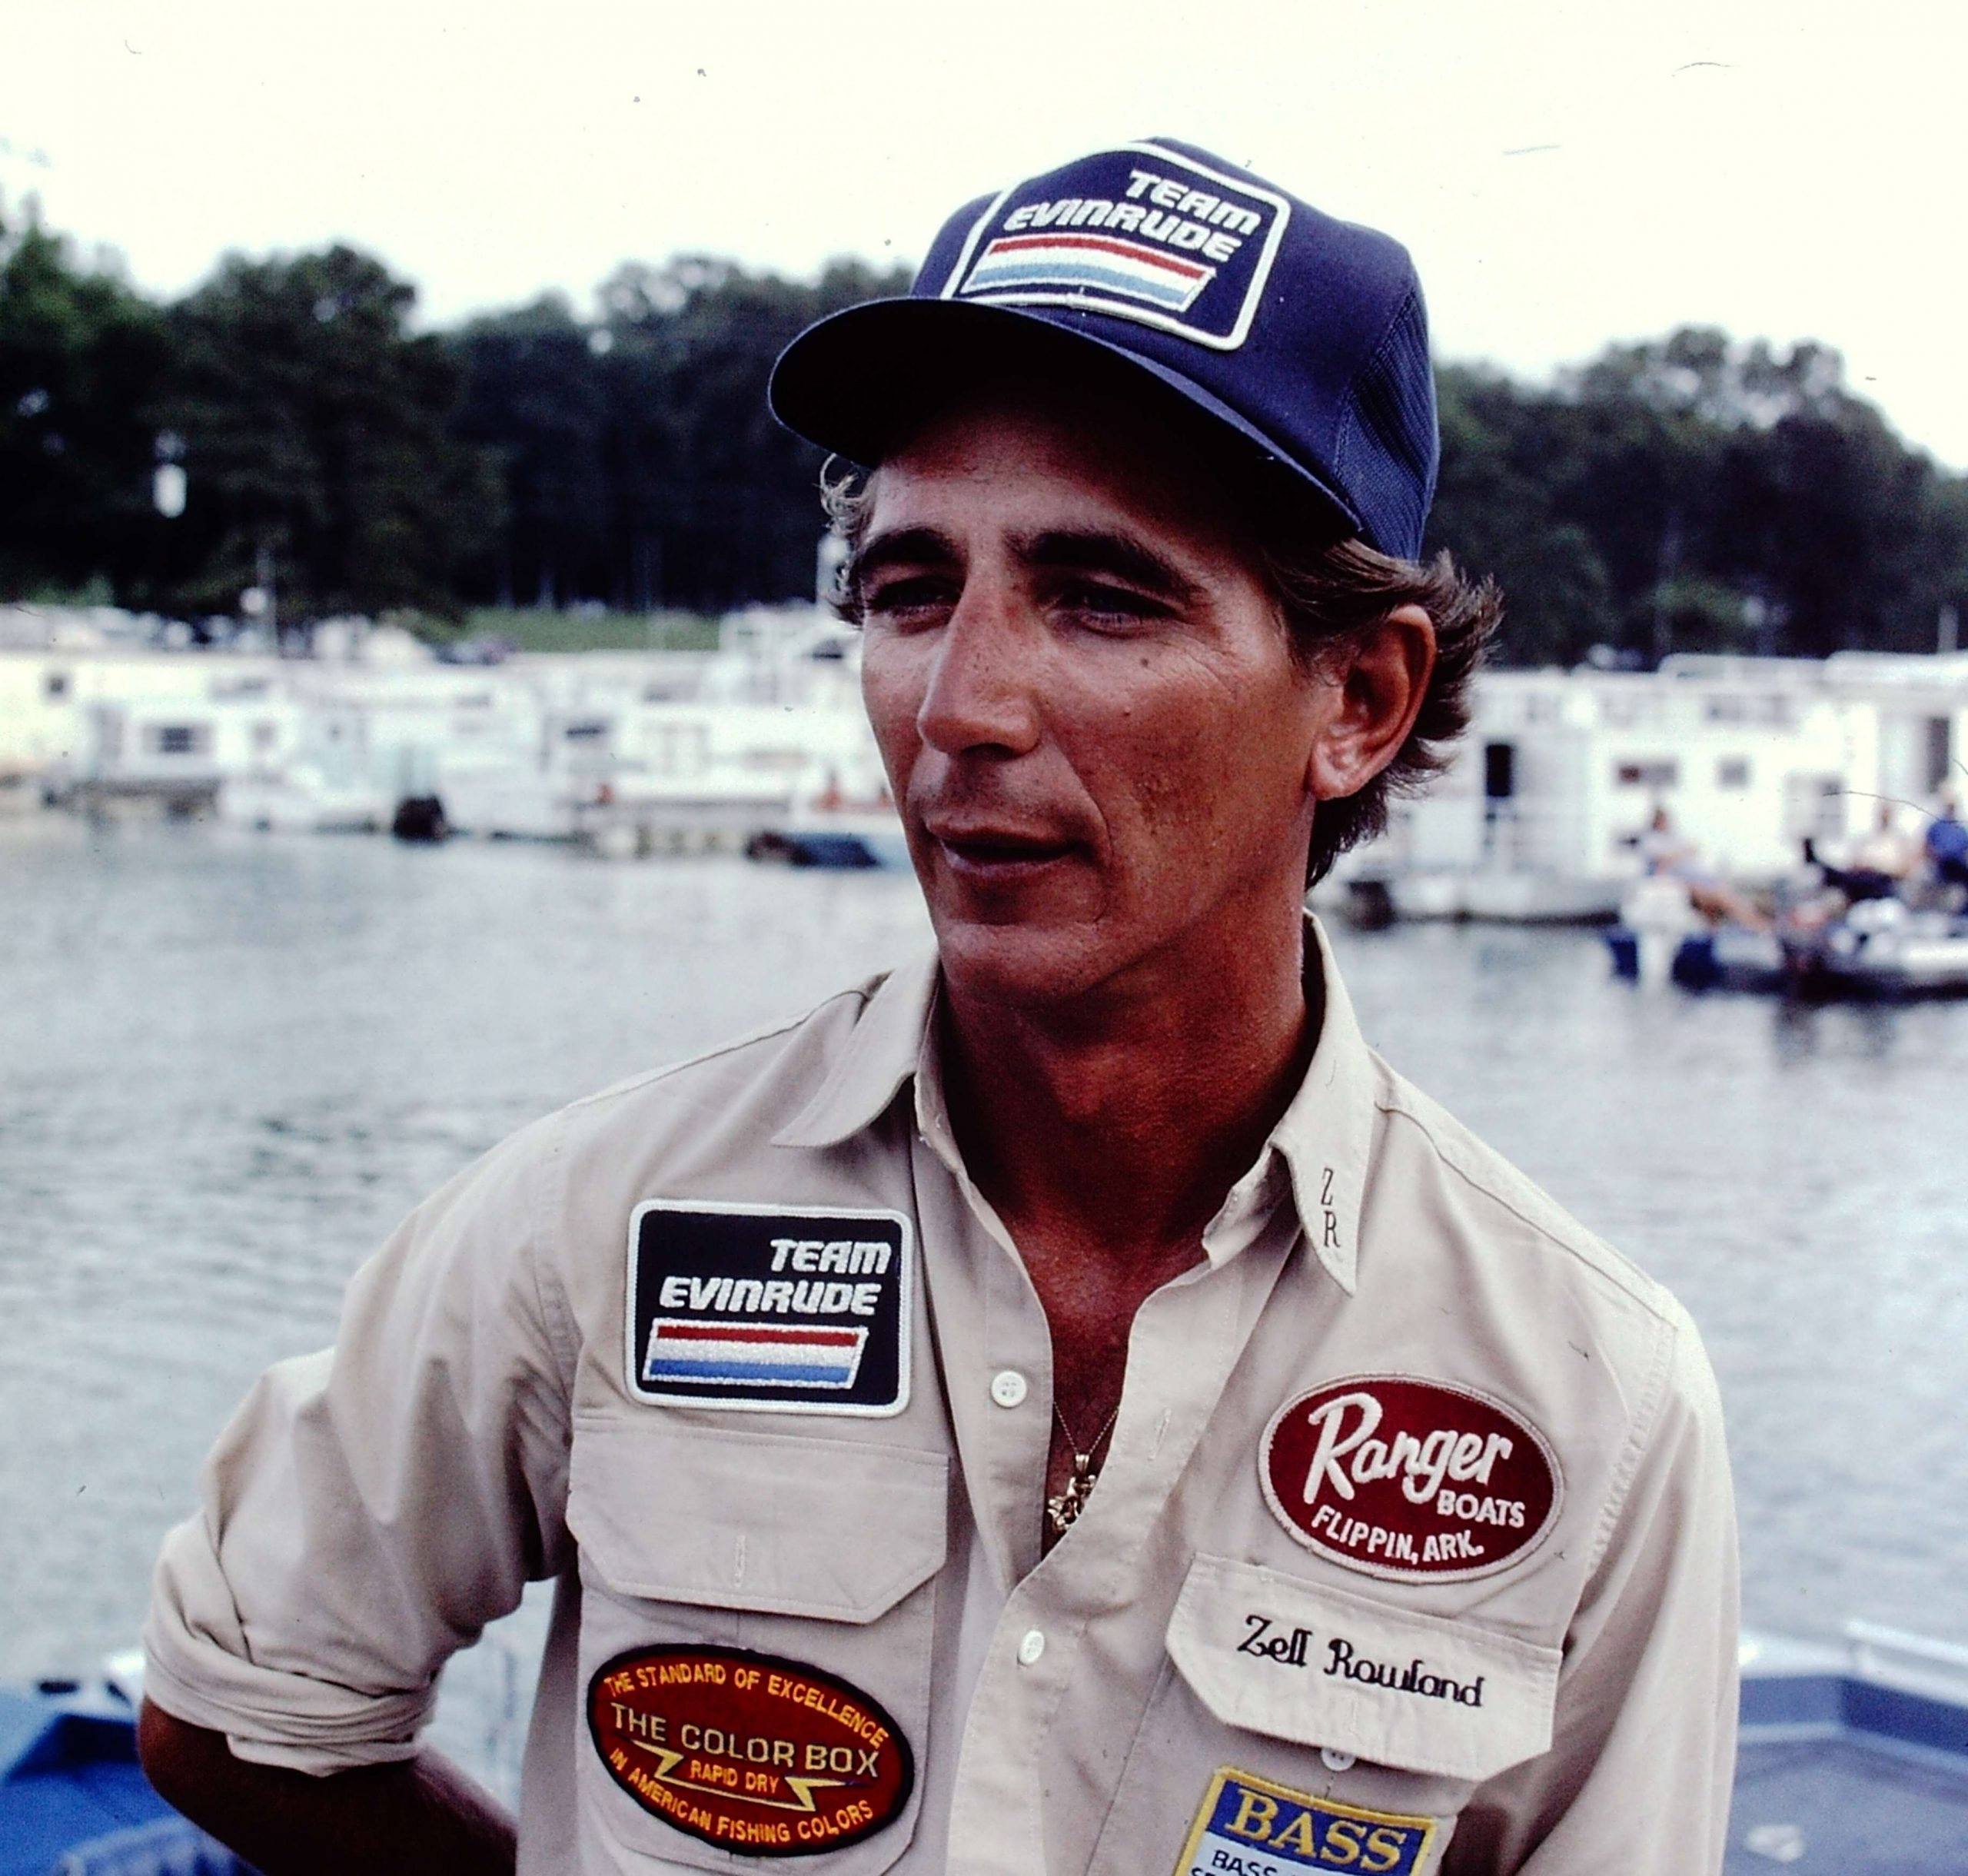 Rowland has an advantage in BASSfest that no other angler has: Heâs won a B.A.S.S. event on Chickamauga, even though it was 28 years ago. The tournament waters then included Nickajack Lake, which is the site of BASSfestâs second chance tournament on July 13 for anglers who didnât make the Top 50 cut in the first part of competition, June 11-12.